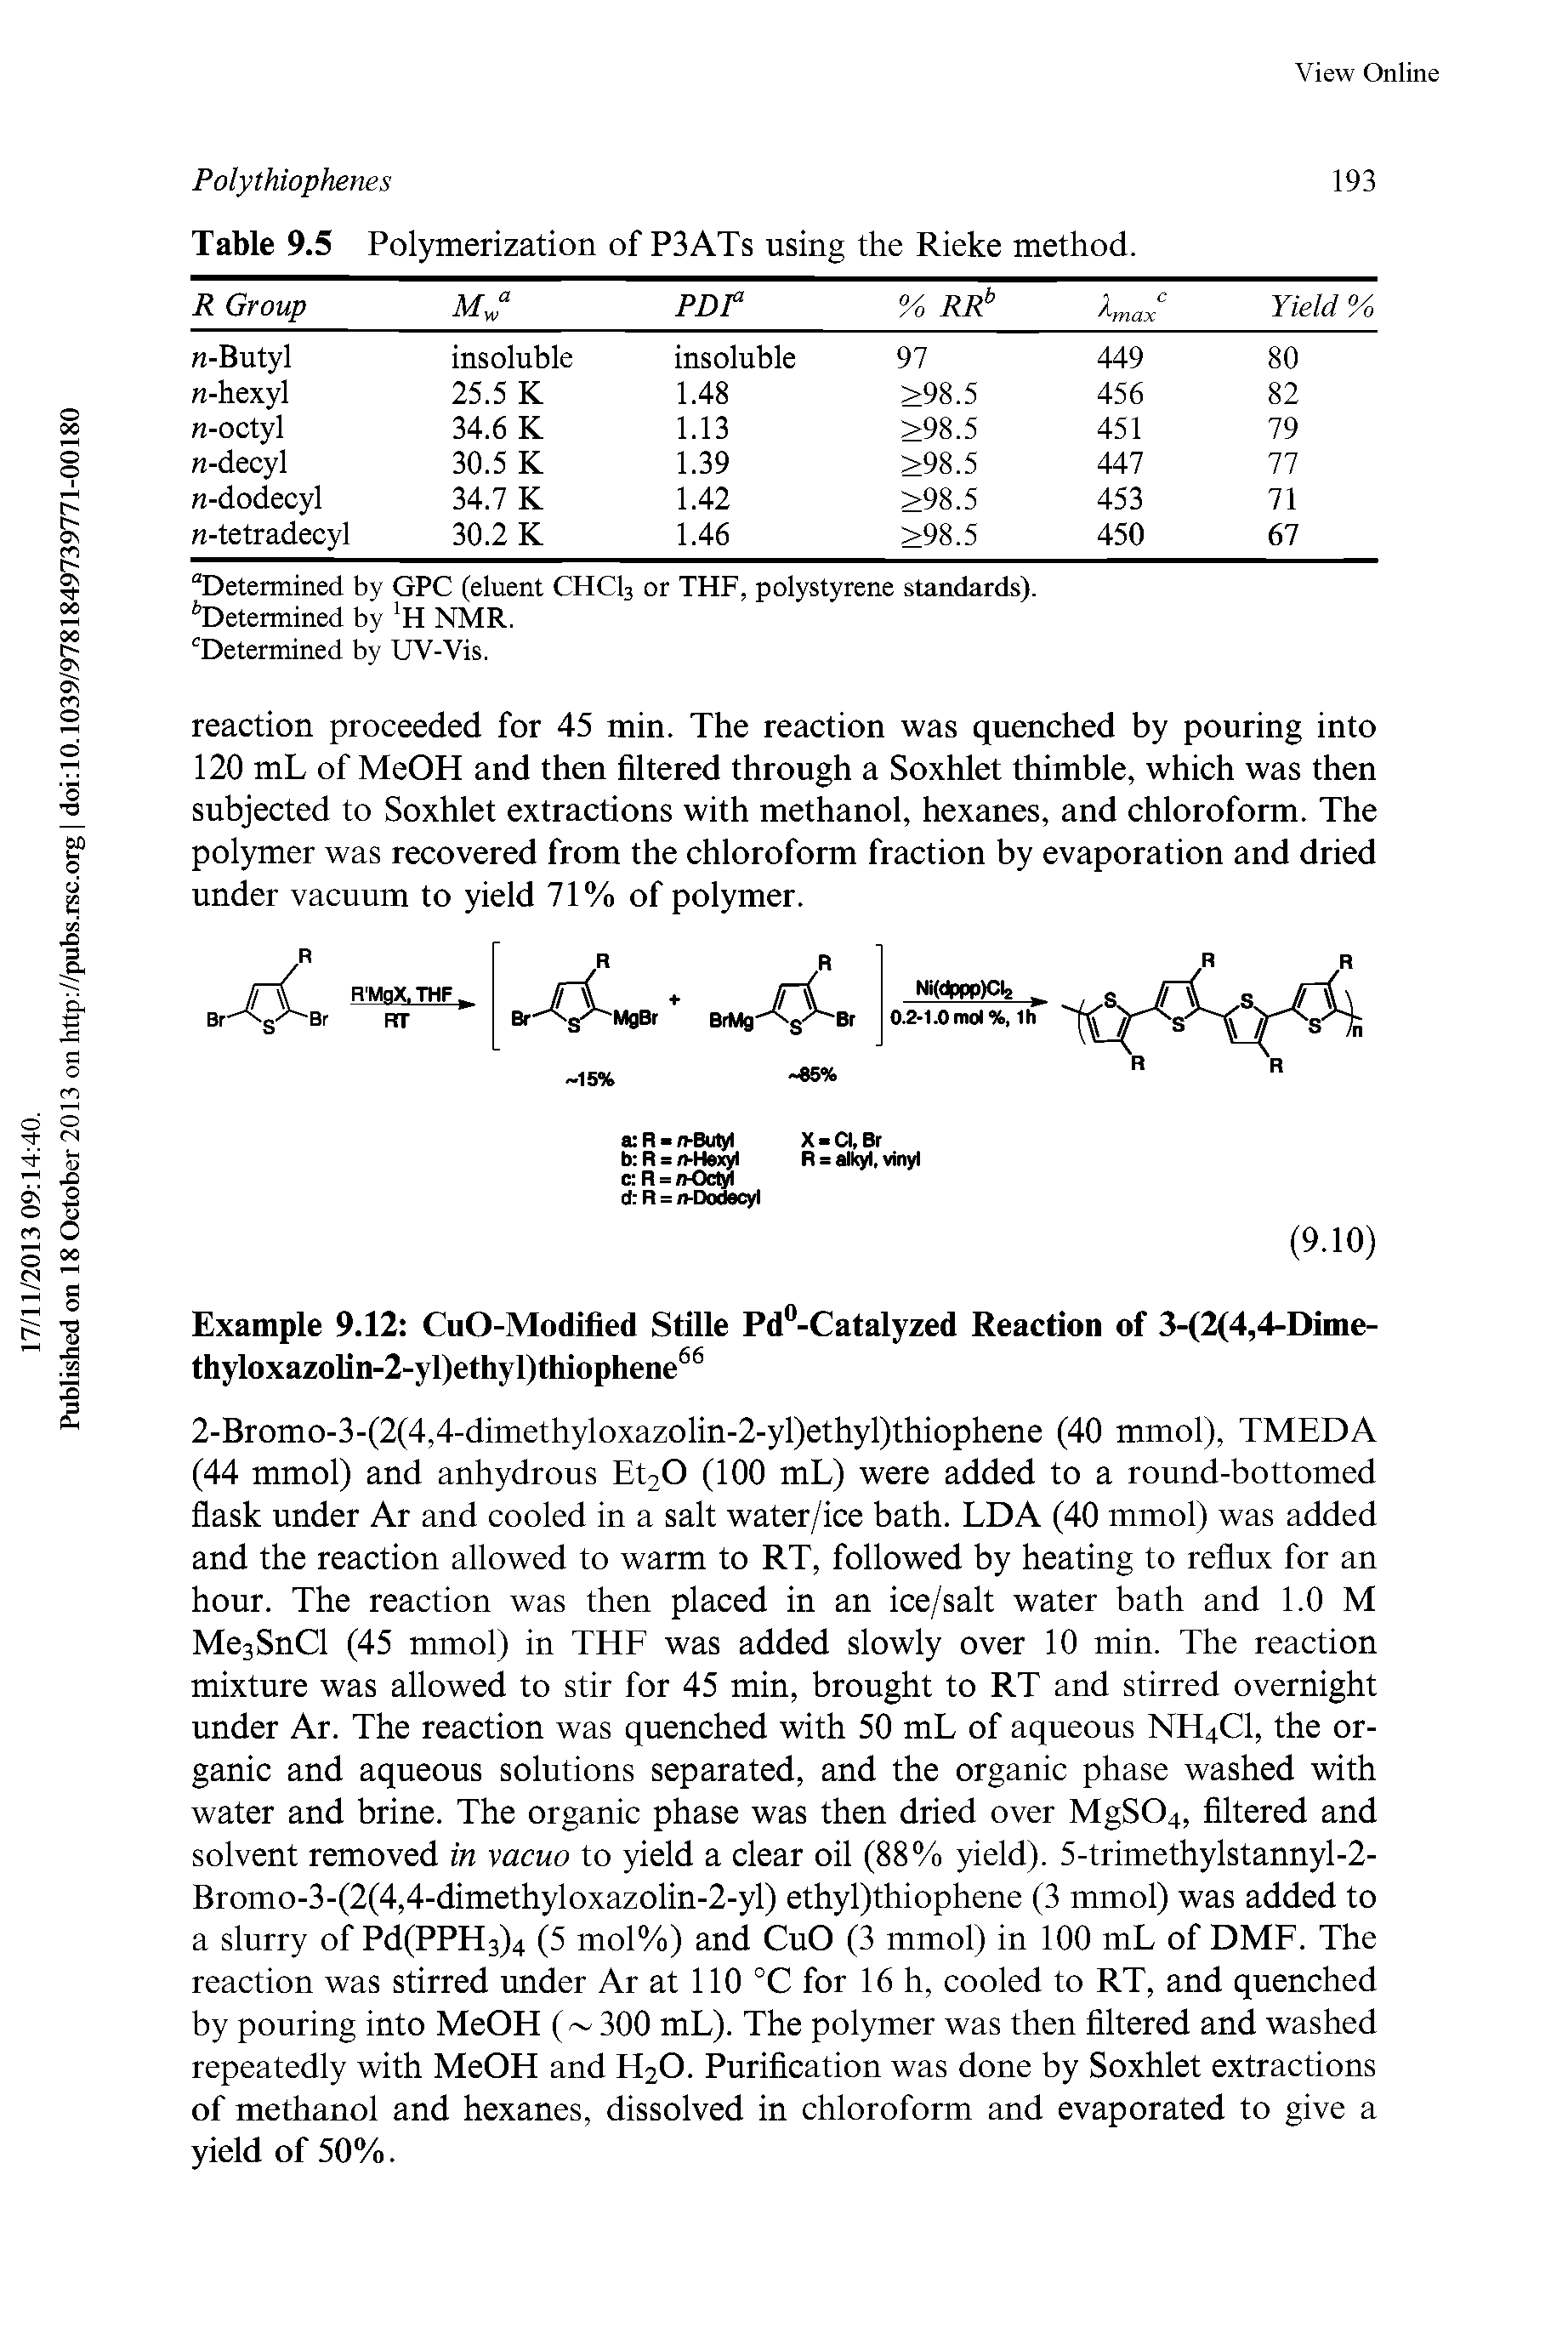 Table 9.5 Polymerization of P3ATs using the Rieke method.